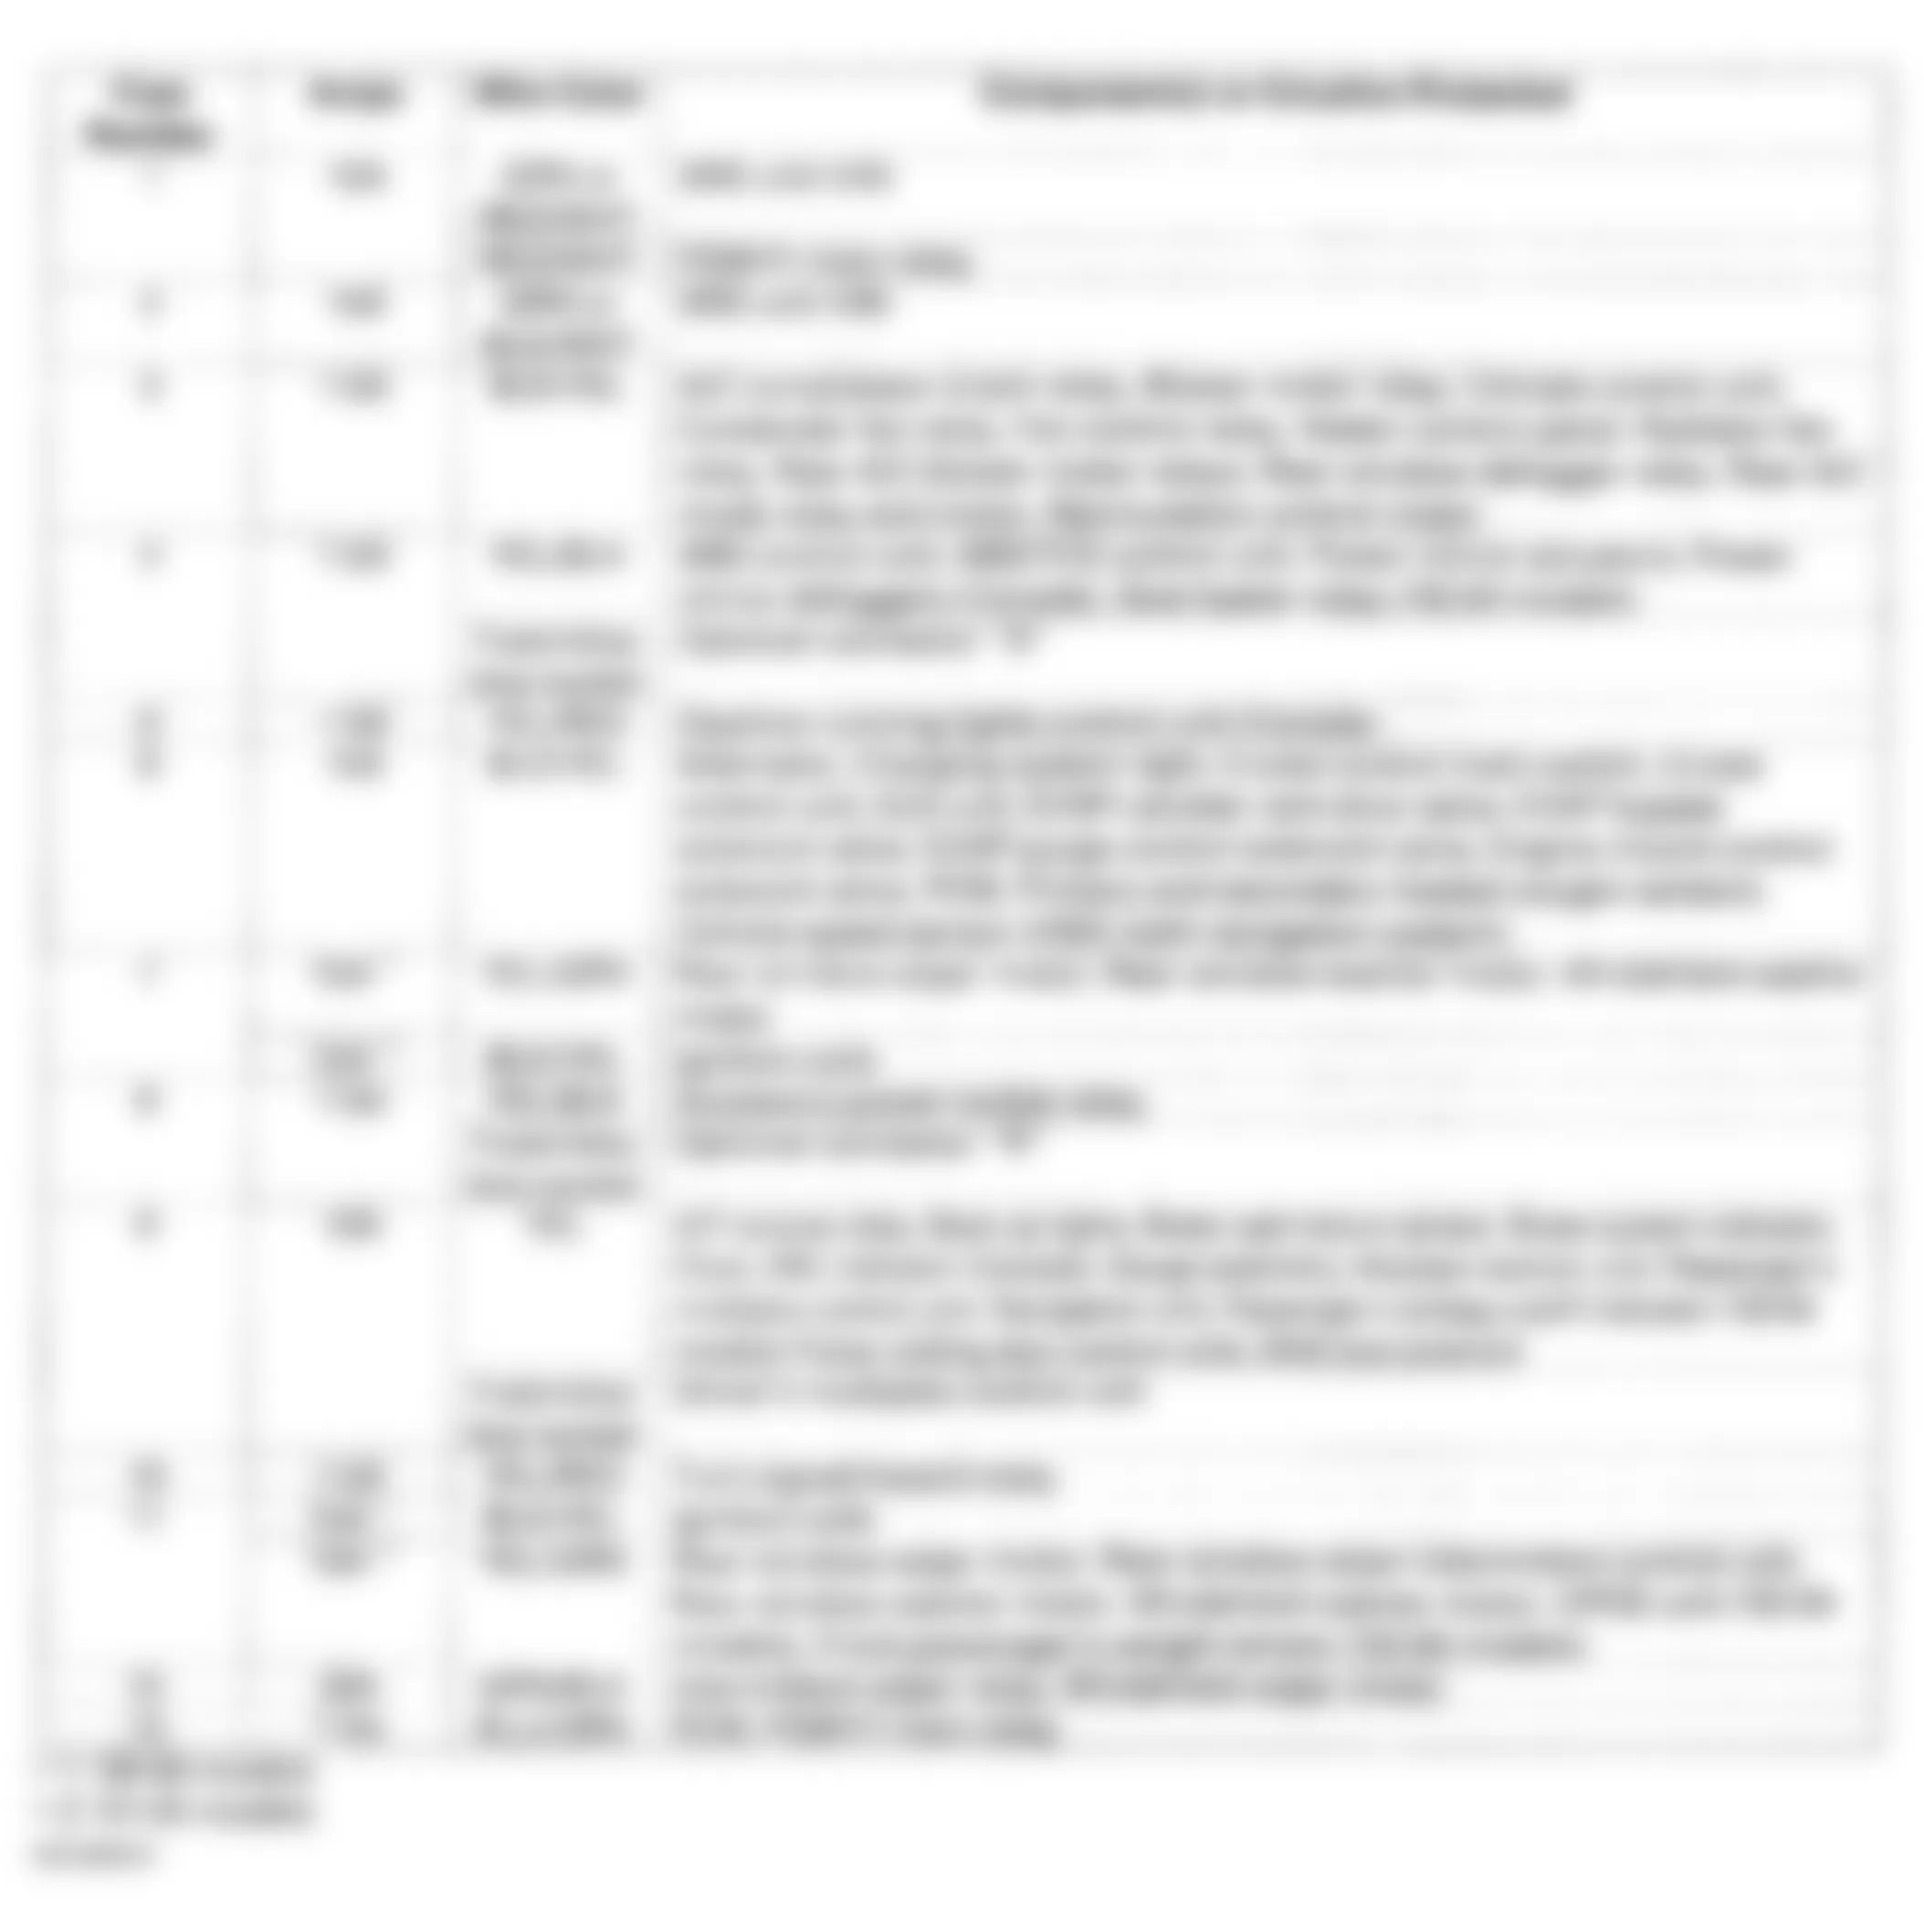 Honda Odyssey LX 2004 - Component Locations -  Drivers Under-Dash Fuse/Relay Box Identification Chart